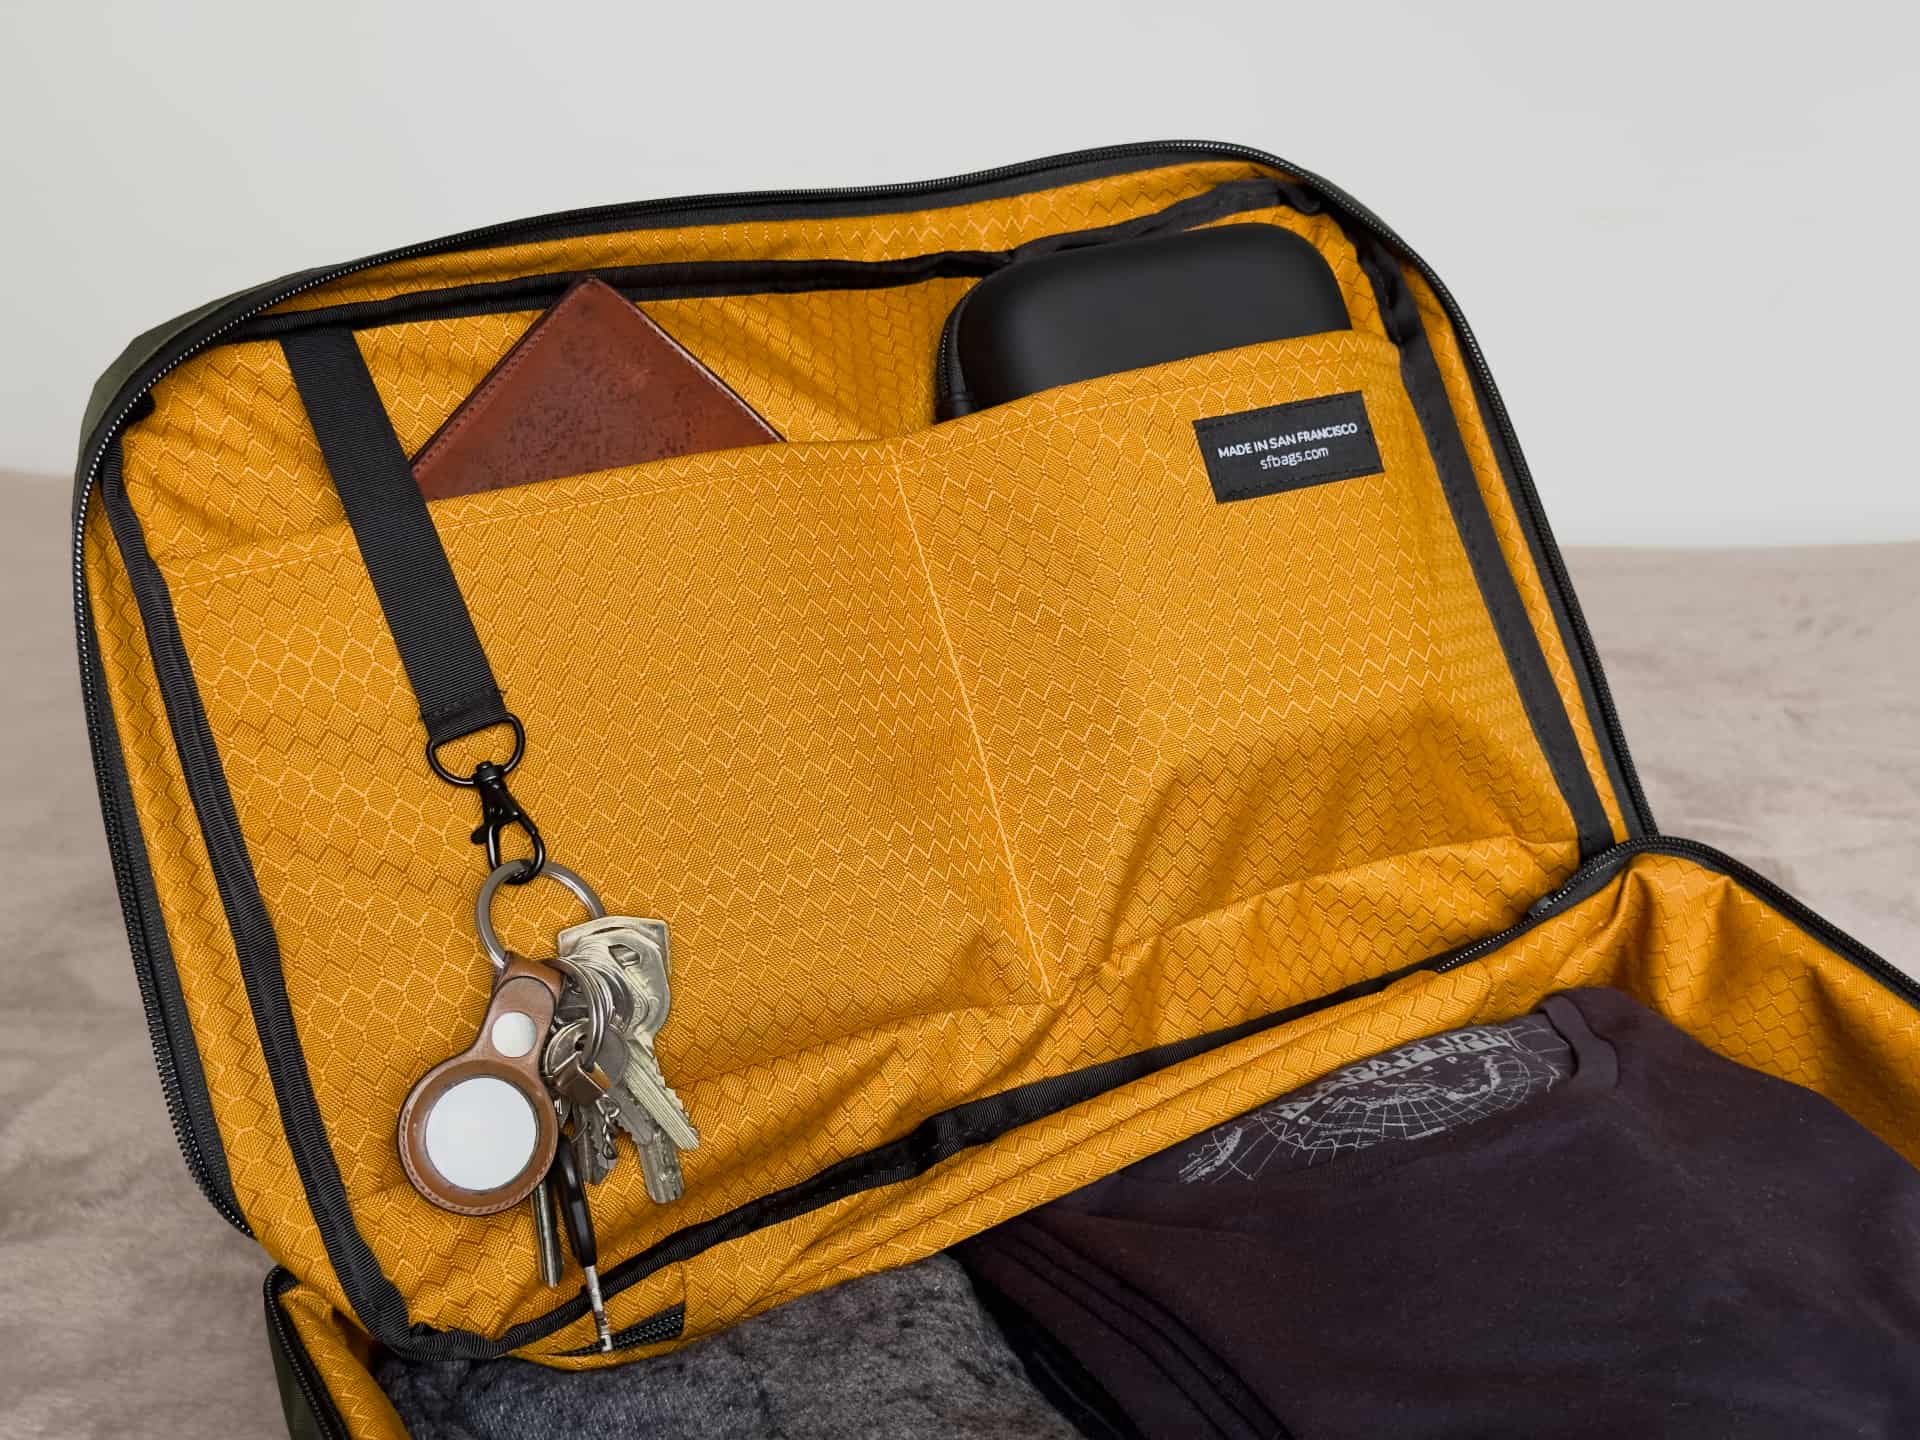 Wallet, keys and camera stabilizer in the pockets of Waterfield's X-Air Duffel travel bag